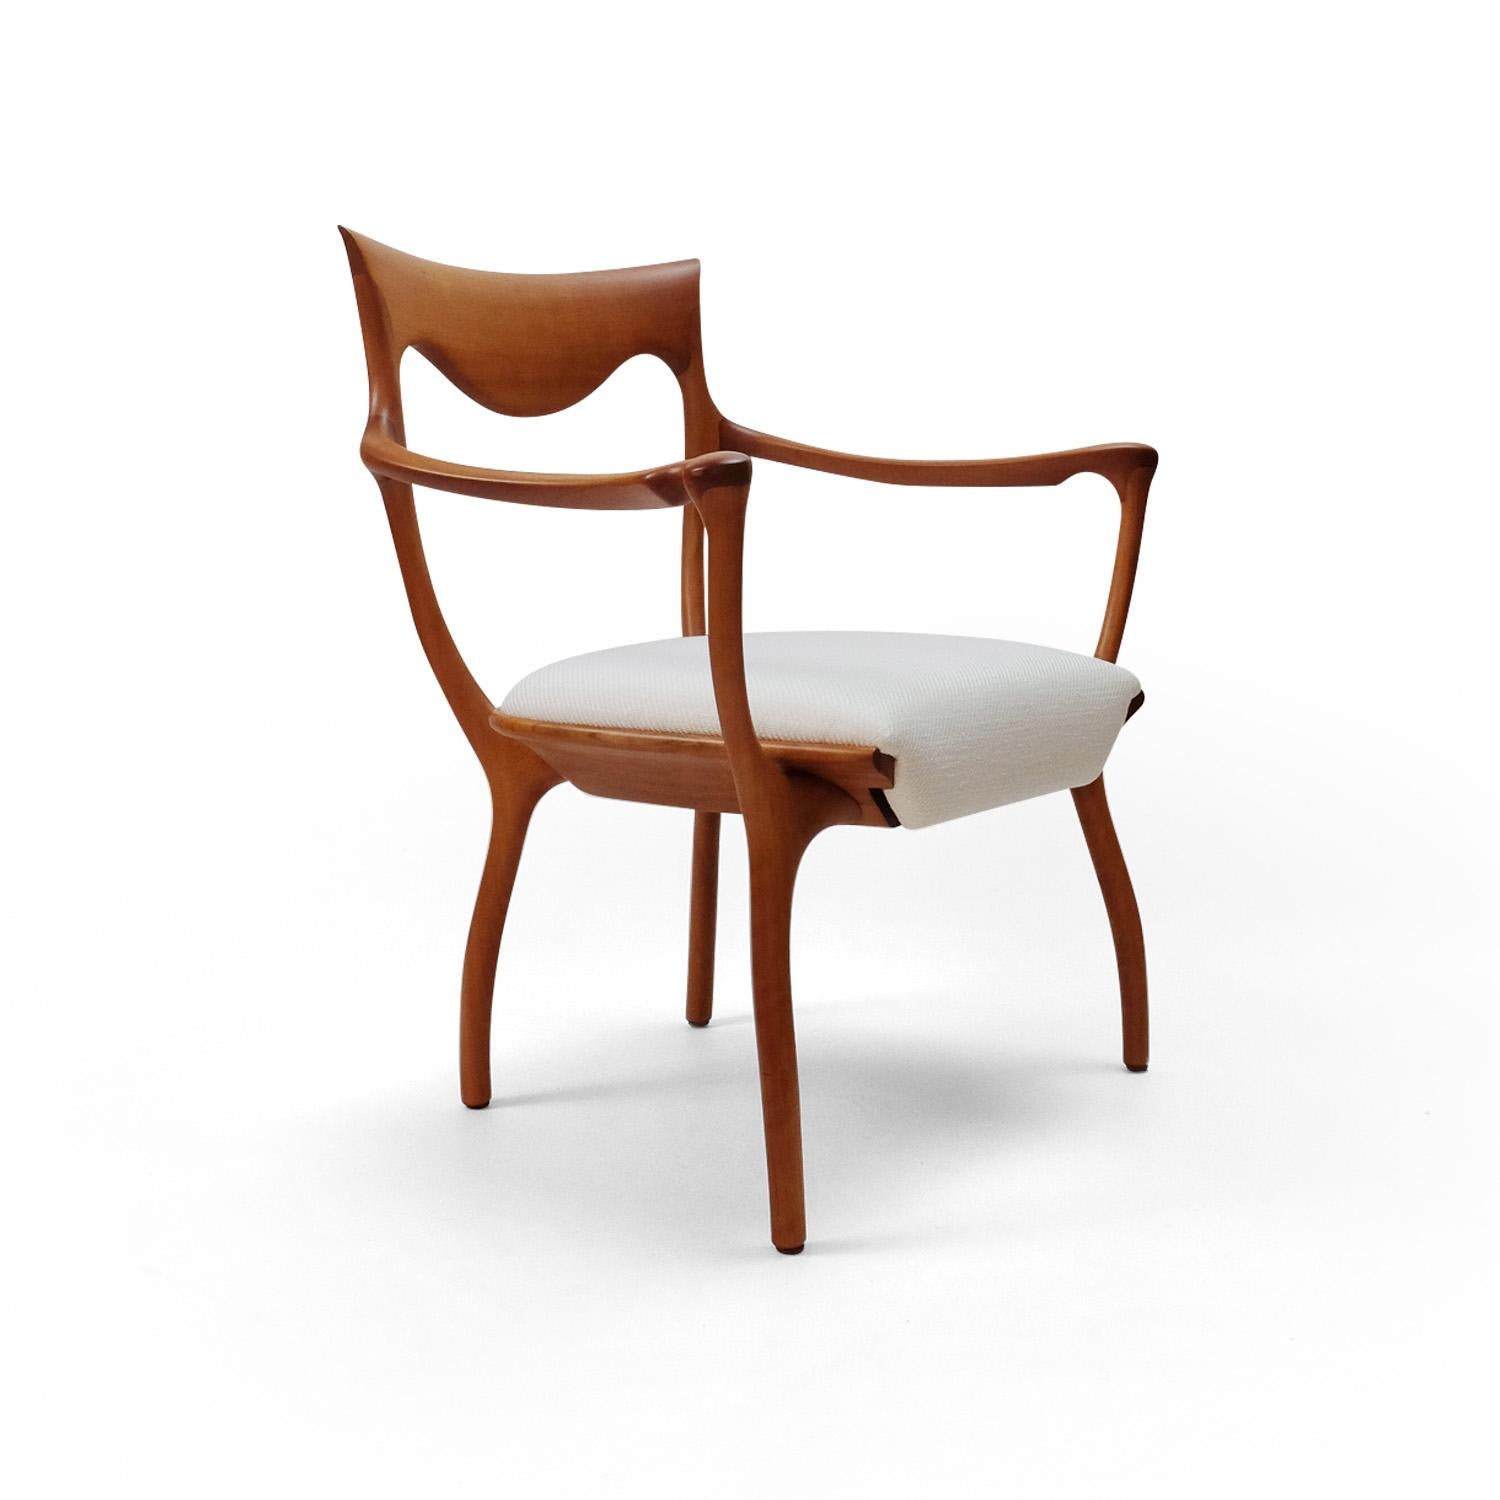 Italian-made chair (model Hypnos) constructed from 22 individual wooden parts, all handmade and with sustainably sourced walnut. 

The seat is upholstered in a white woolen fabric.